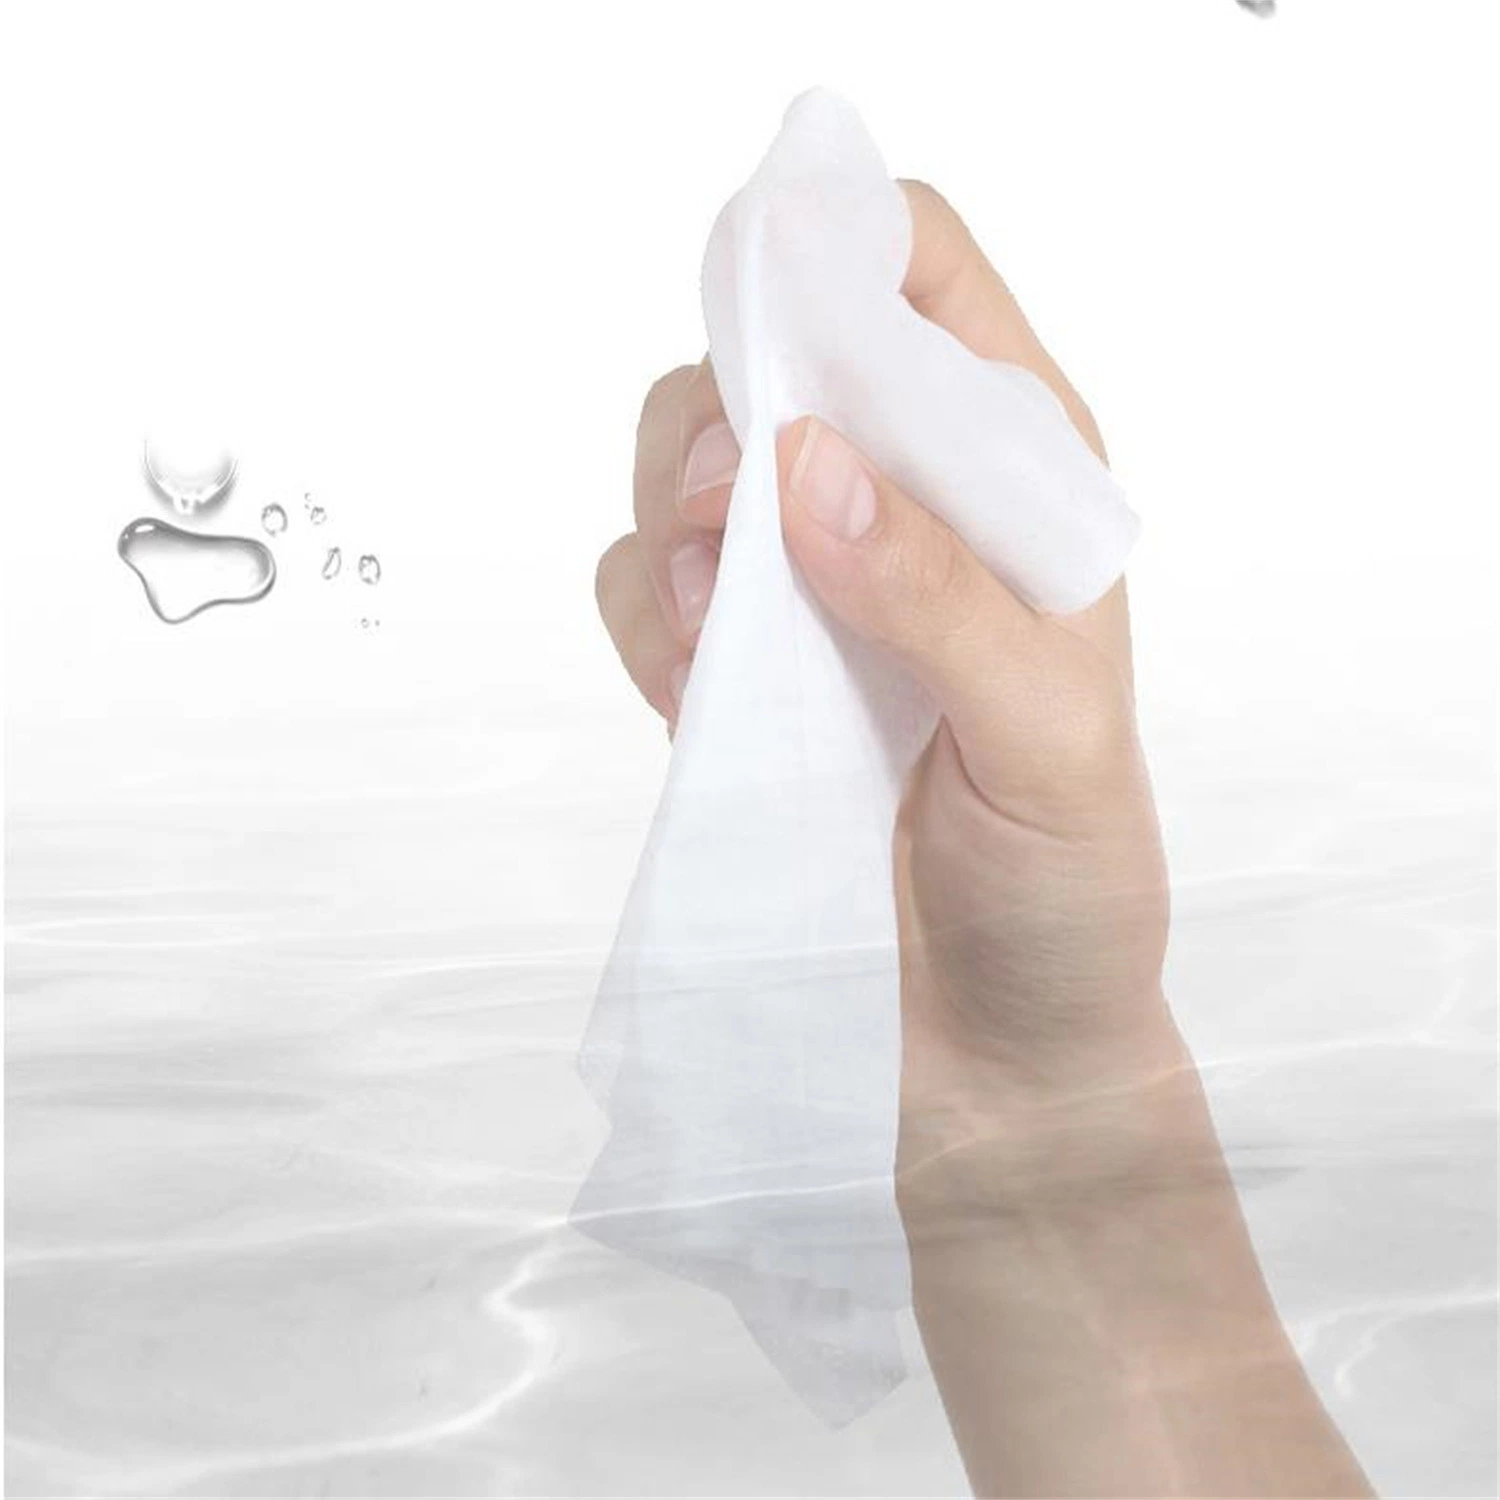 Factory Supply Antibacterial Sanitizer Hand Wipes 75% Alcohol Disinfectant Wet Wipes